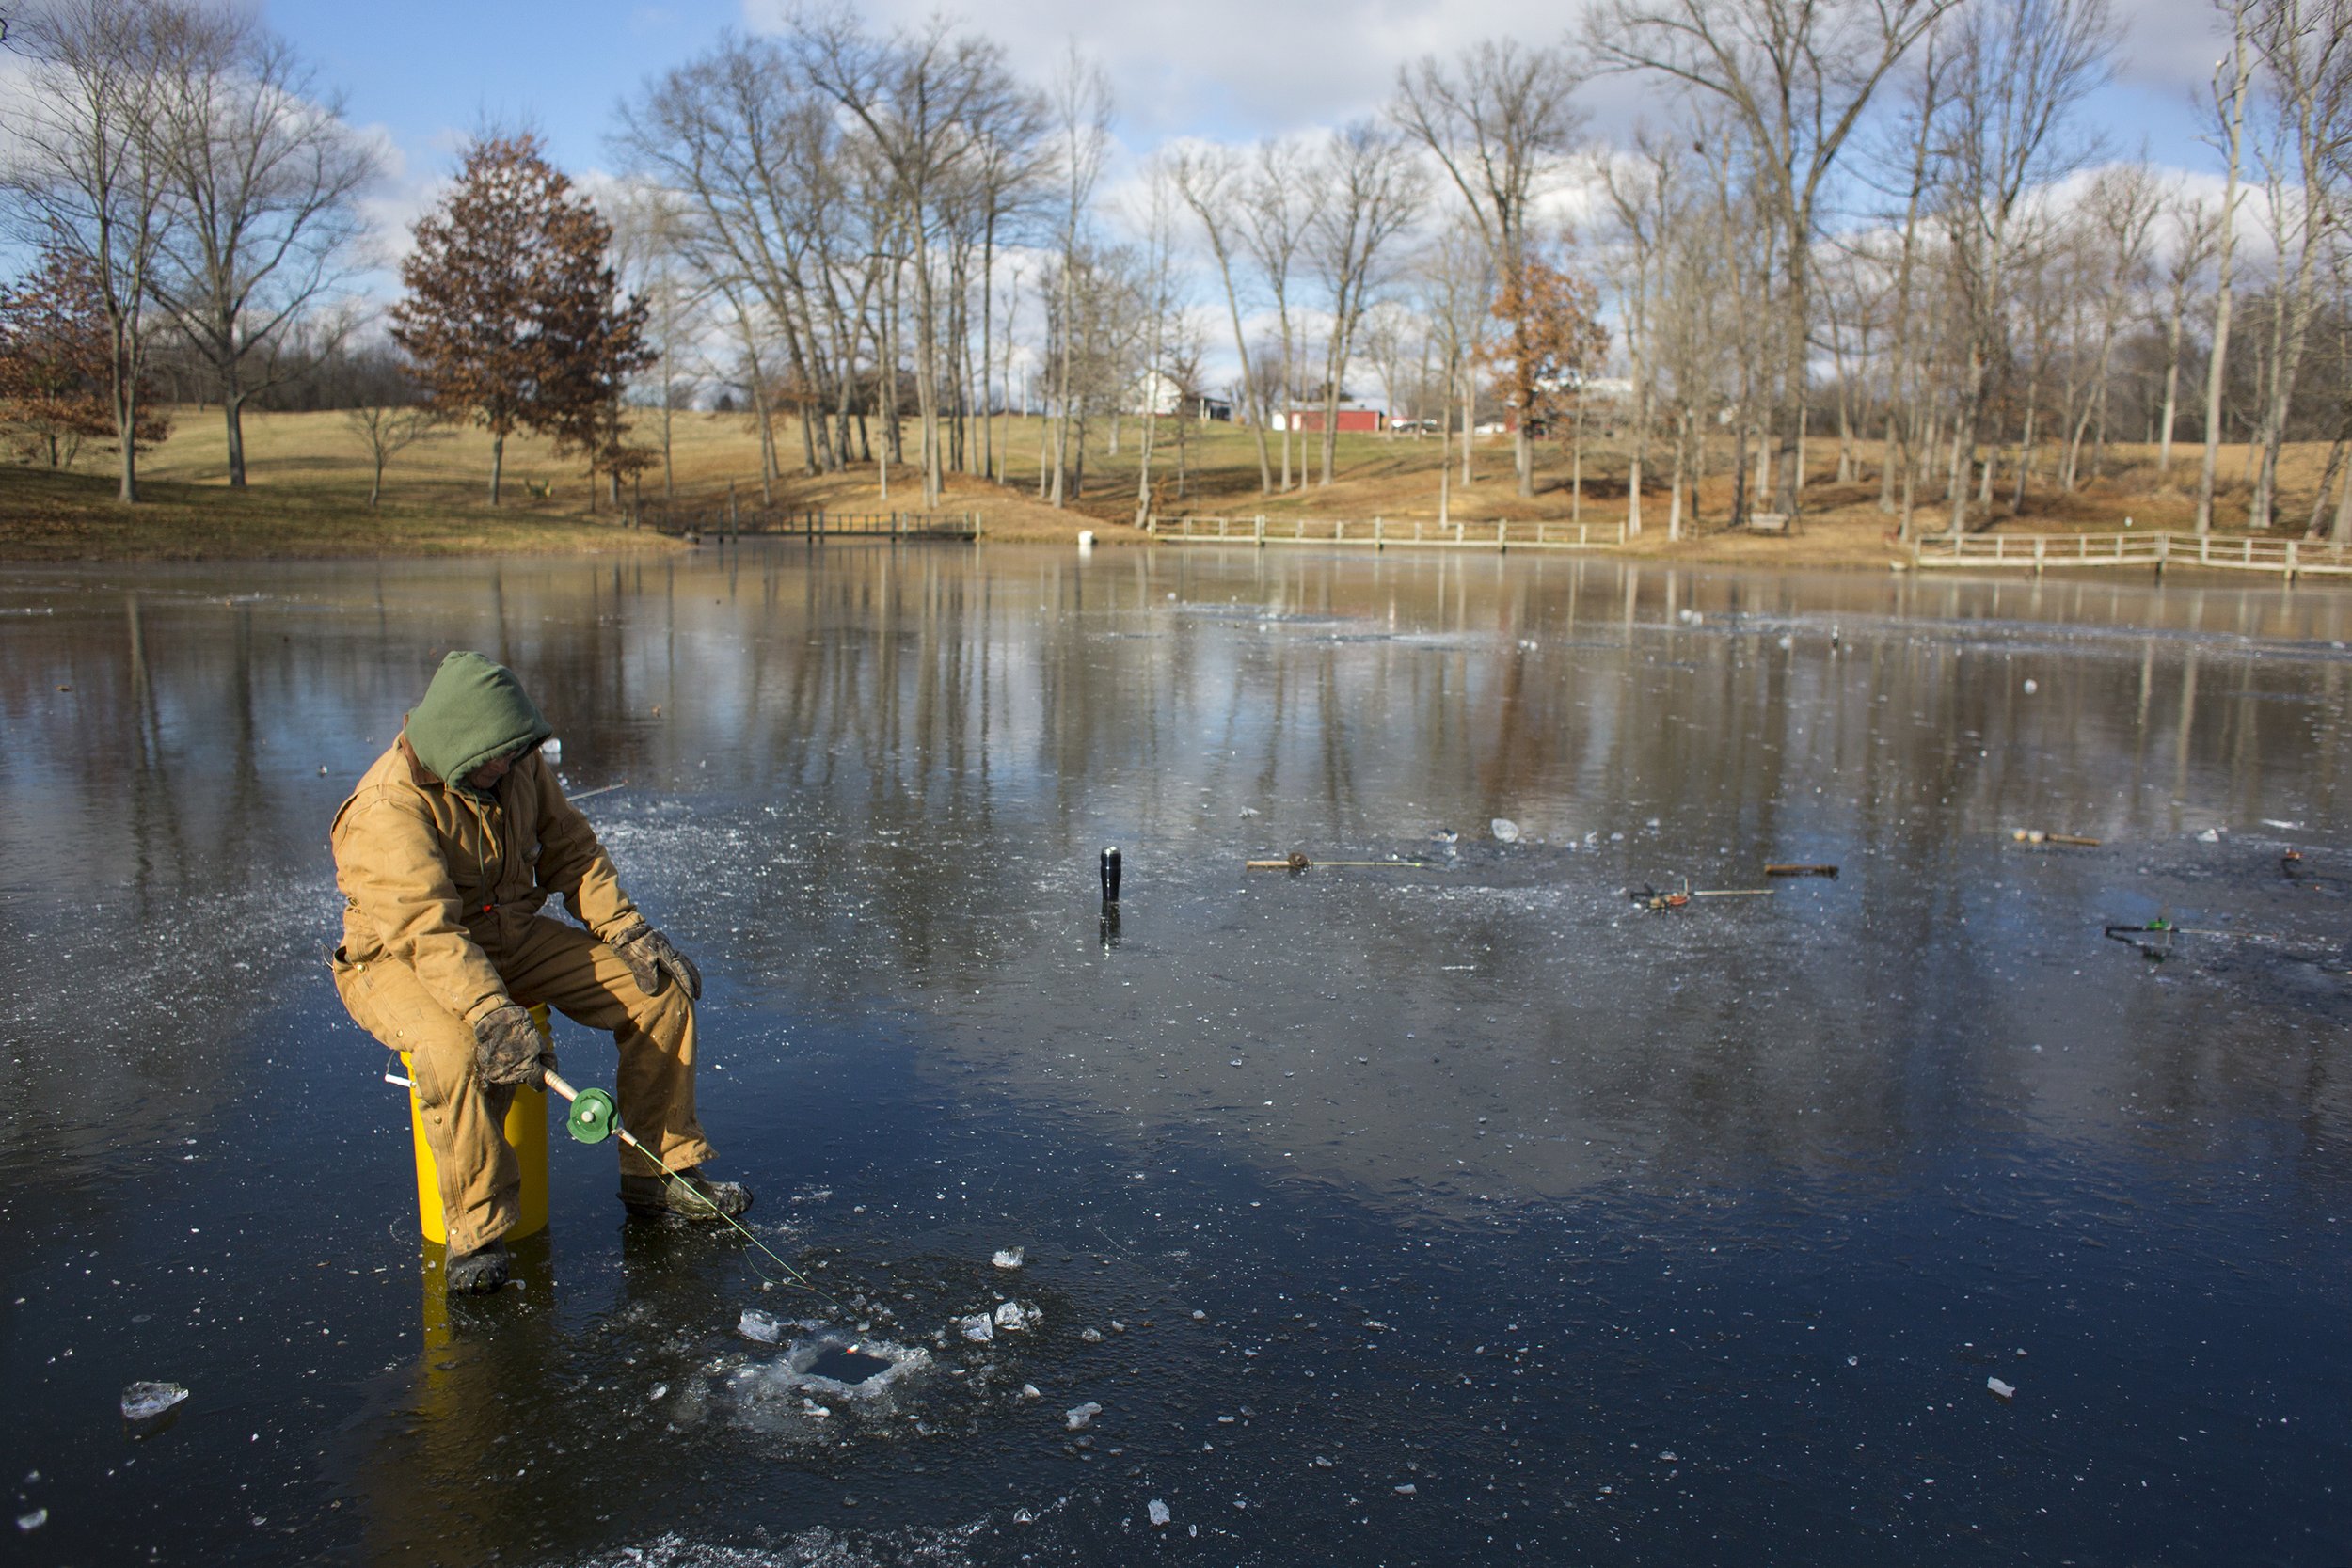  “I don’t care if it’s cold, hot, whatever. I like catching fish,” Sherry Buschkoetter said while making use of the cold weather to do some New Year’s Eve ice fishing Dec. 31 on the pond behind her Jasper home in Indiana. She said the fish taste much